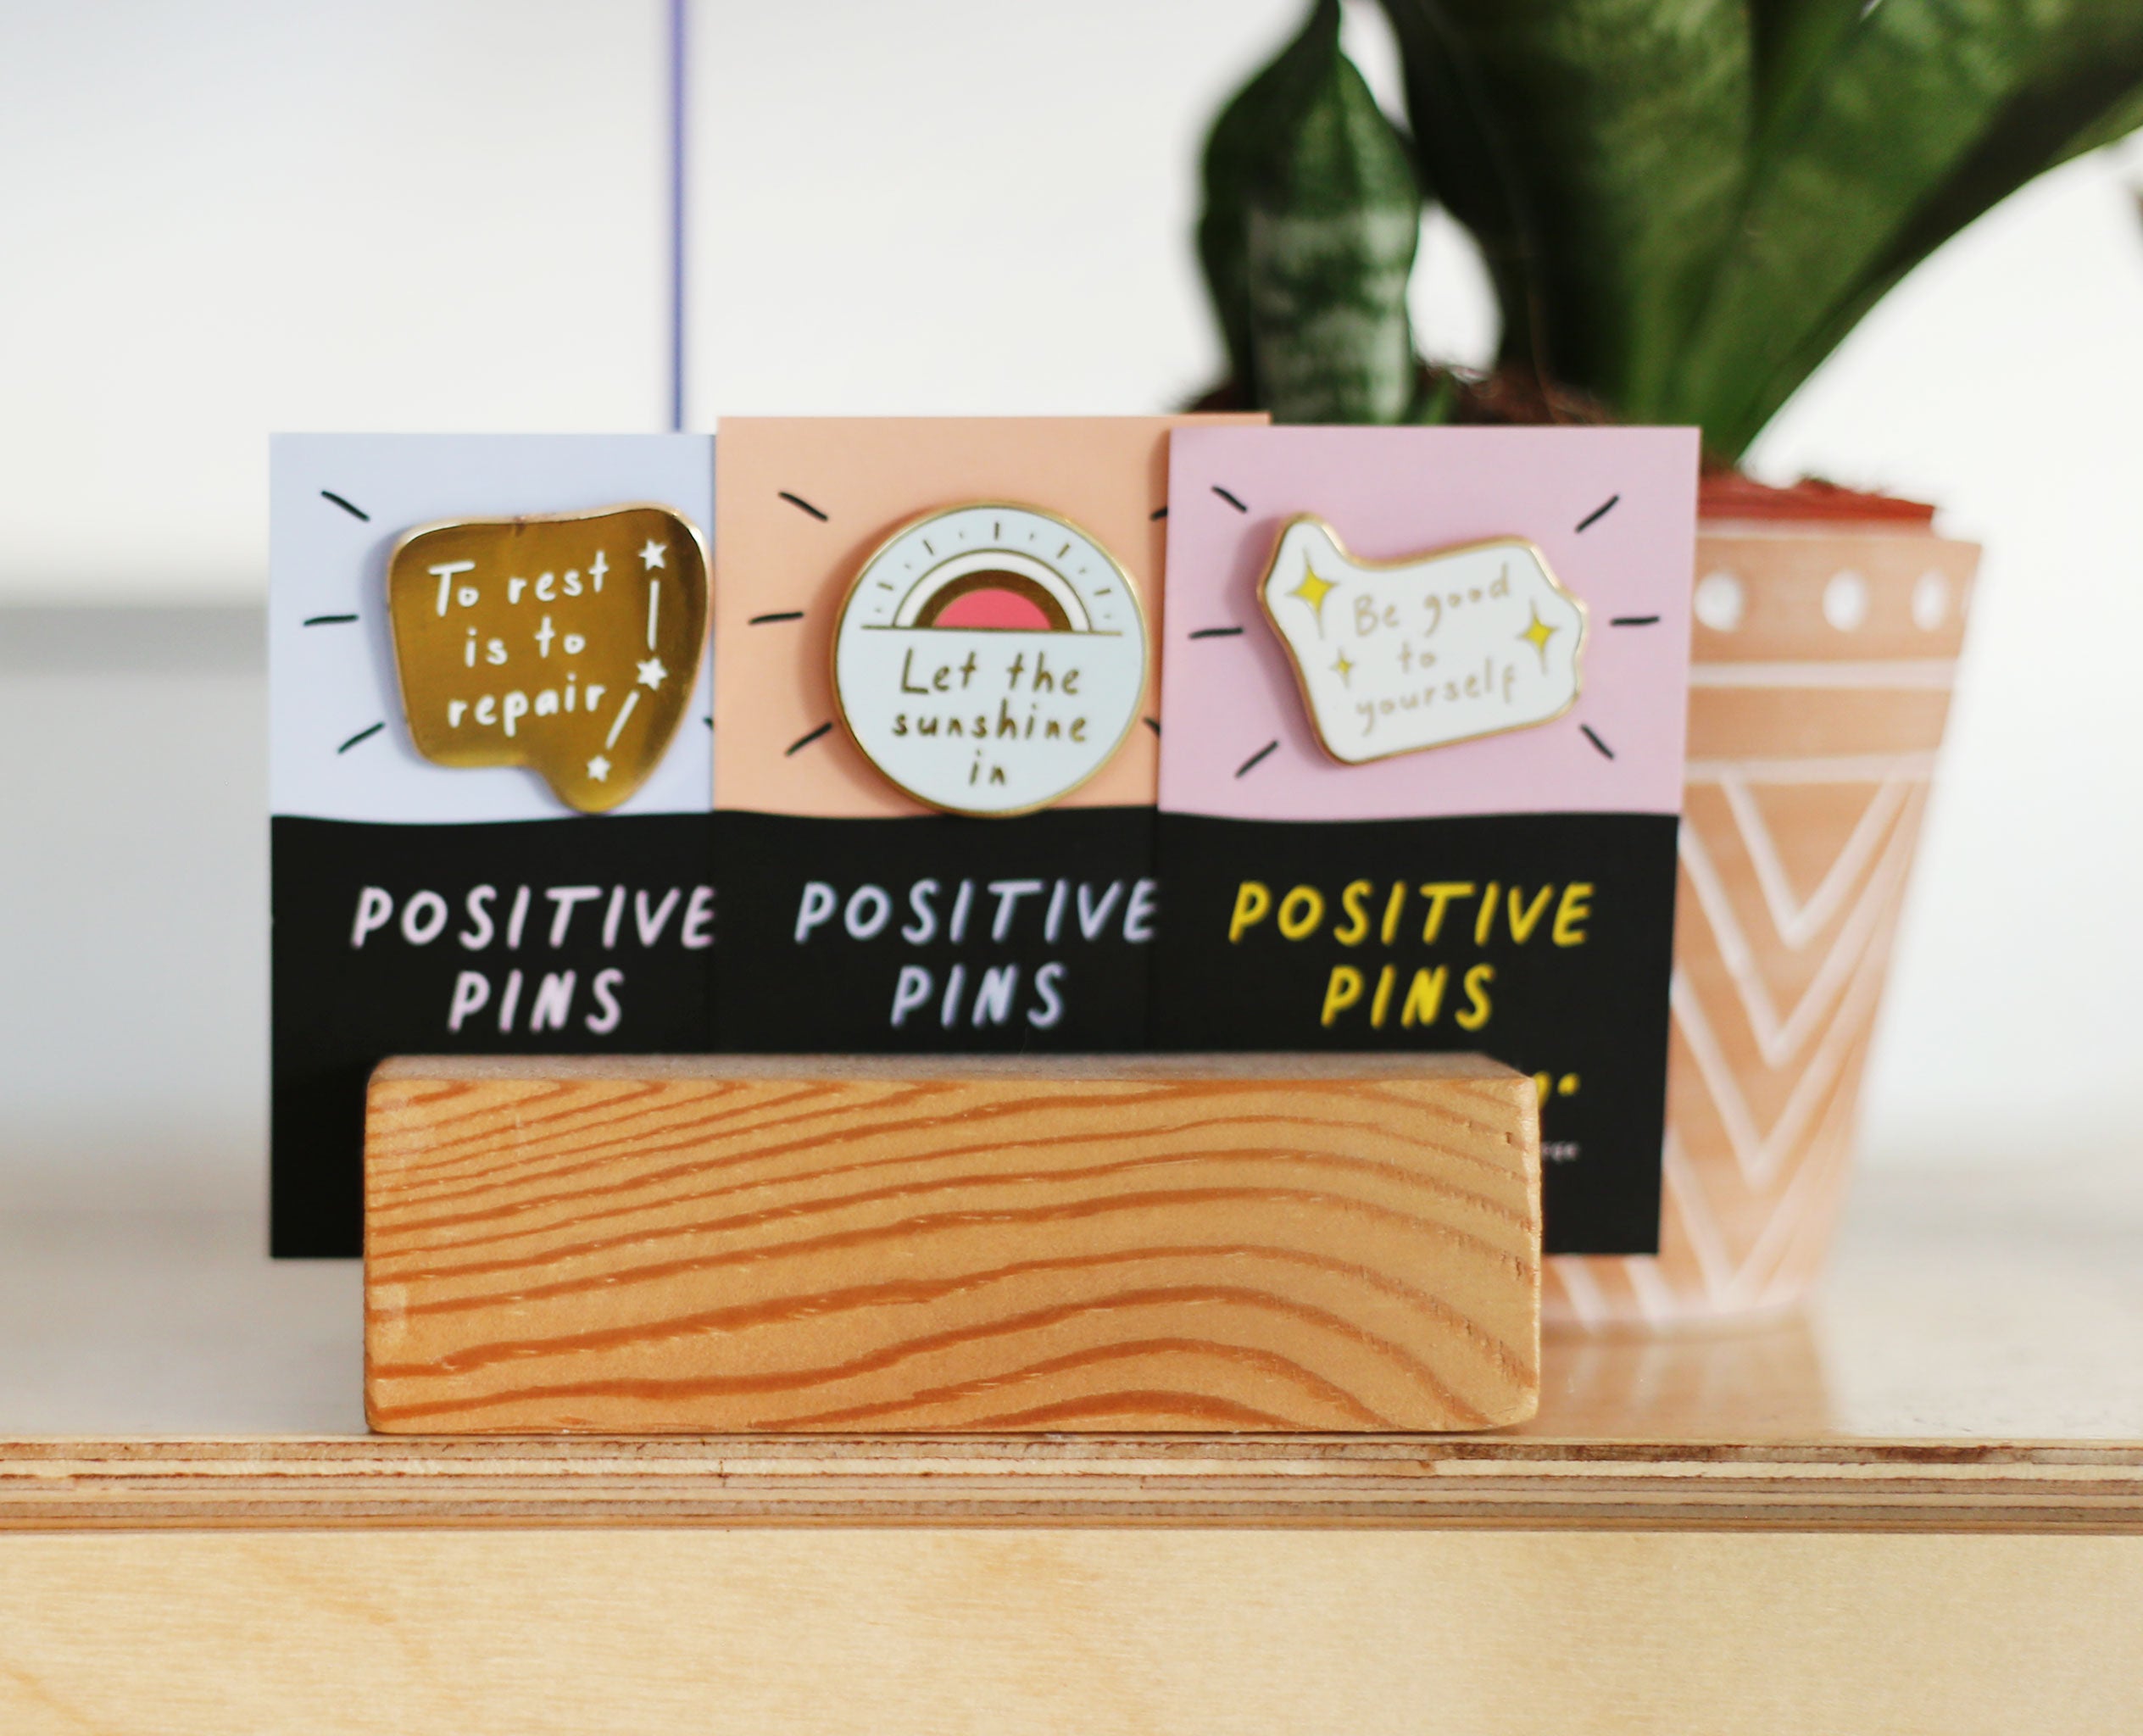 Our Positive Pins